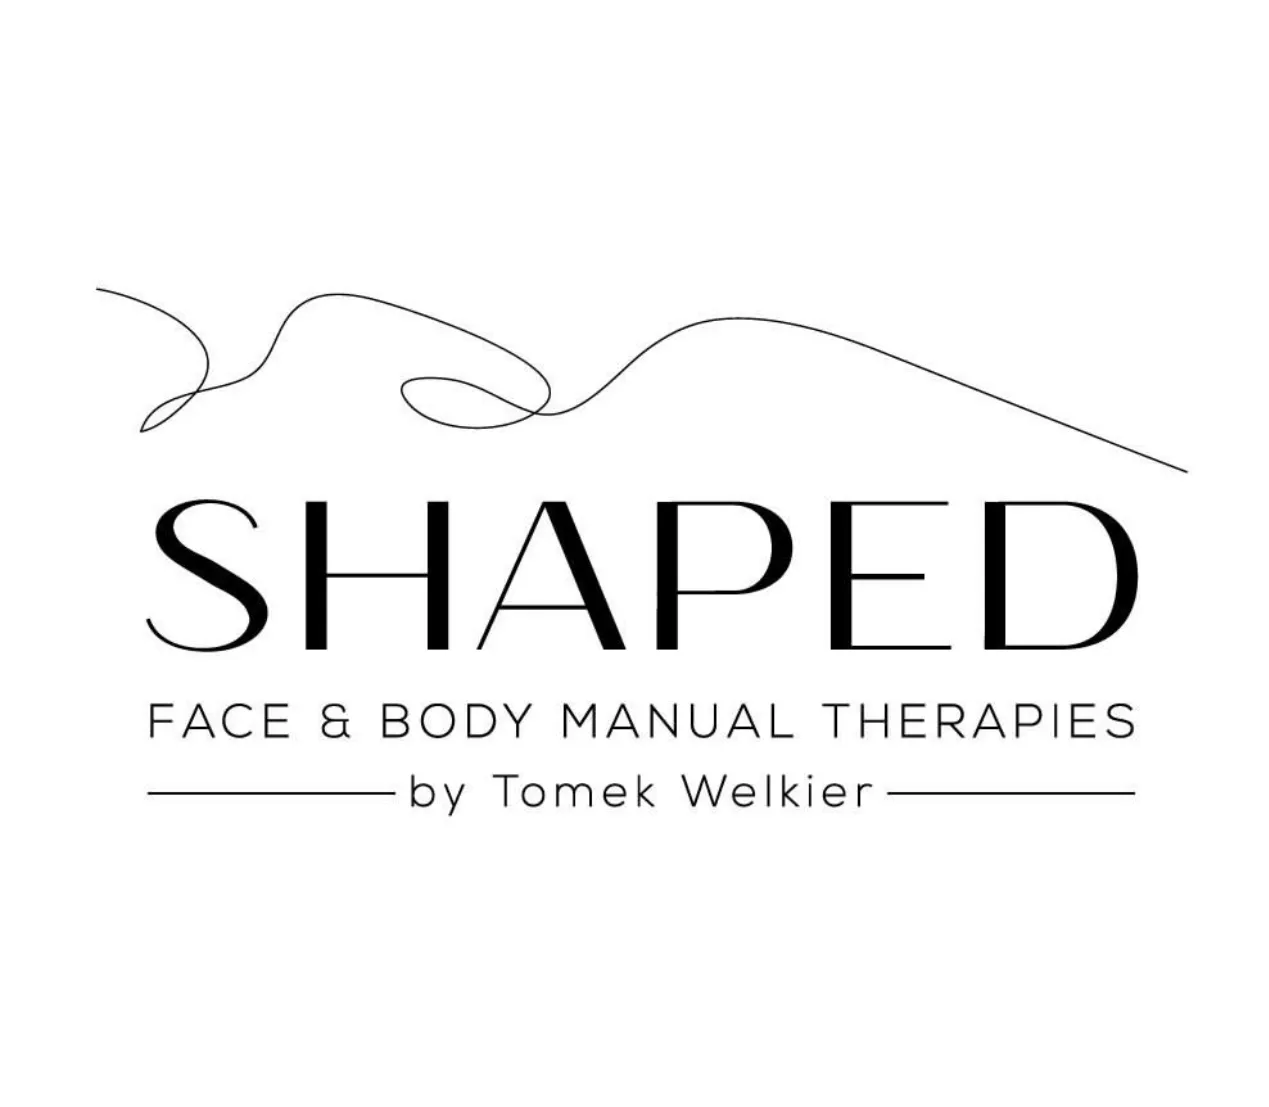 Shaped - Face & Body Manual Therapies